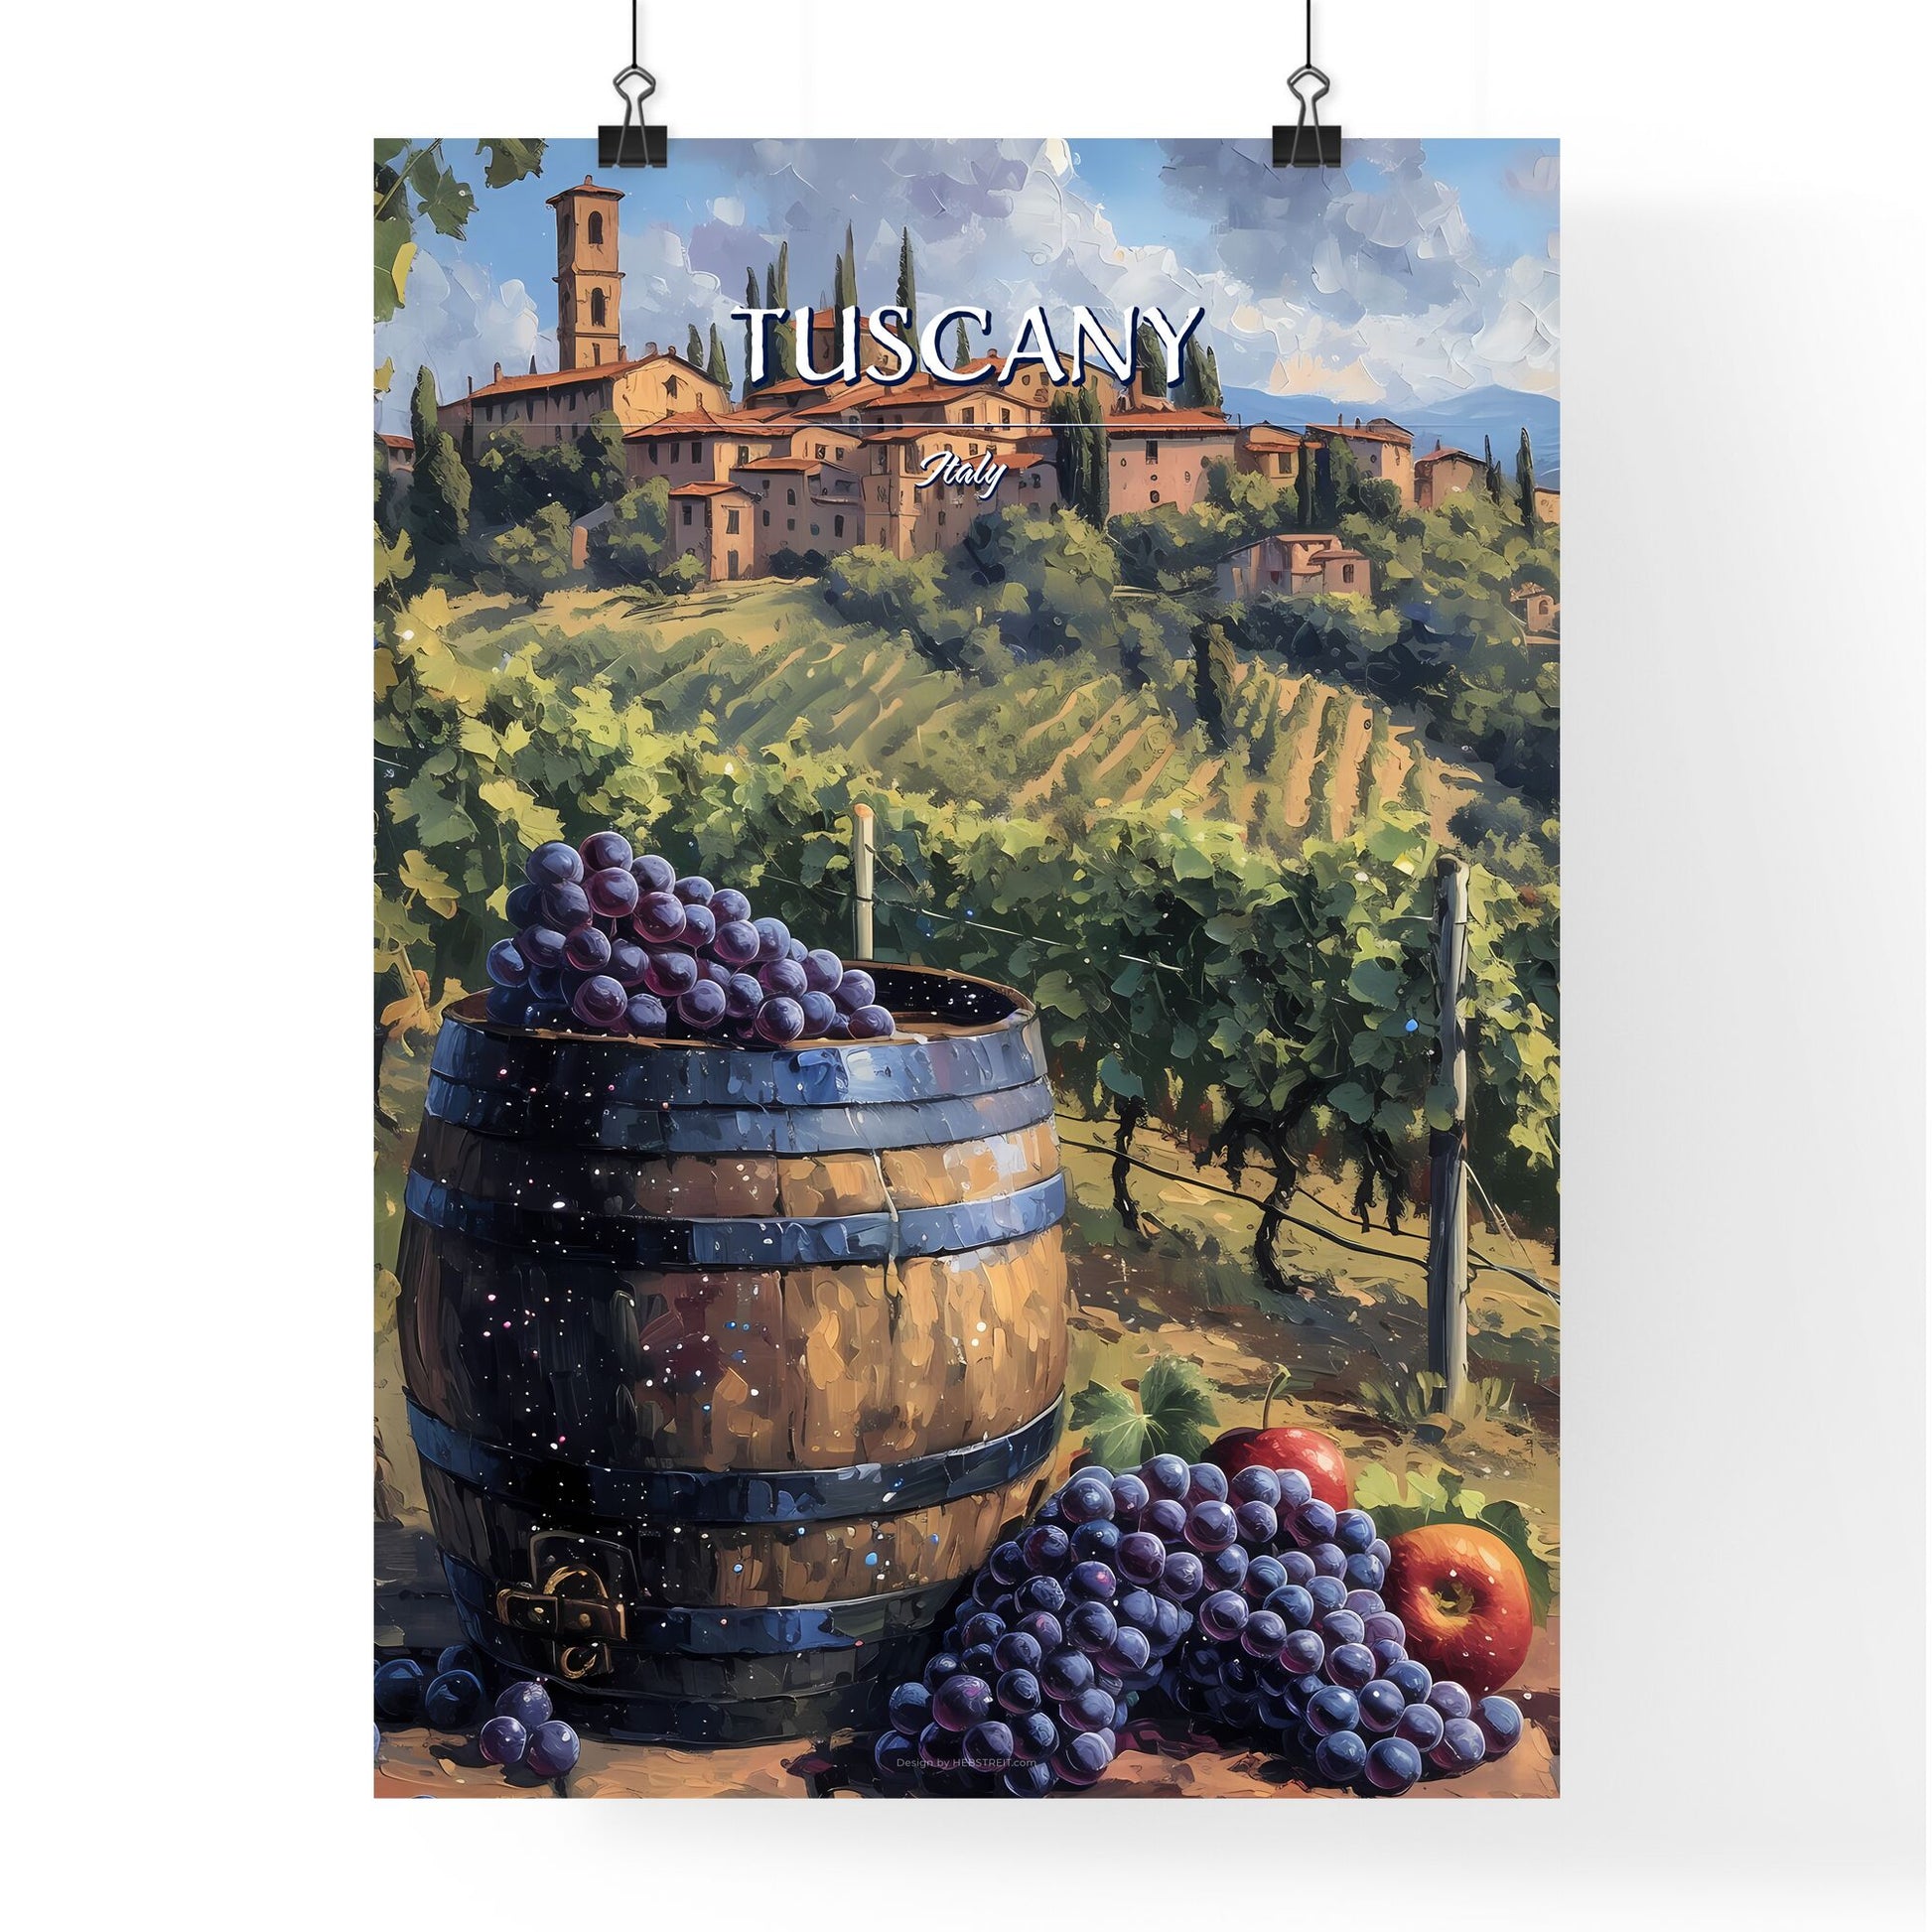 Tuscany, Italy - Art print of a painting of a vineyard with a barrel of grapes and a building in the distance Default Title